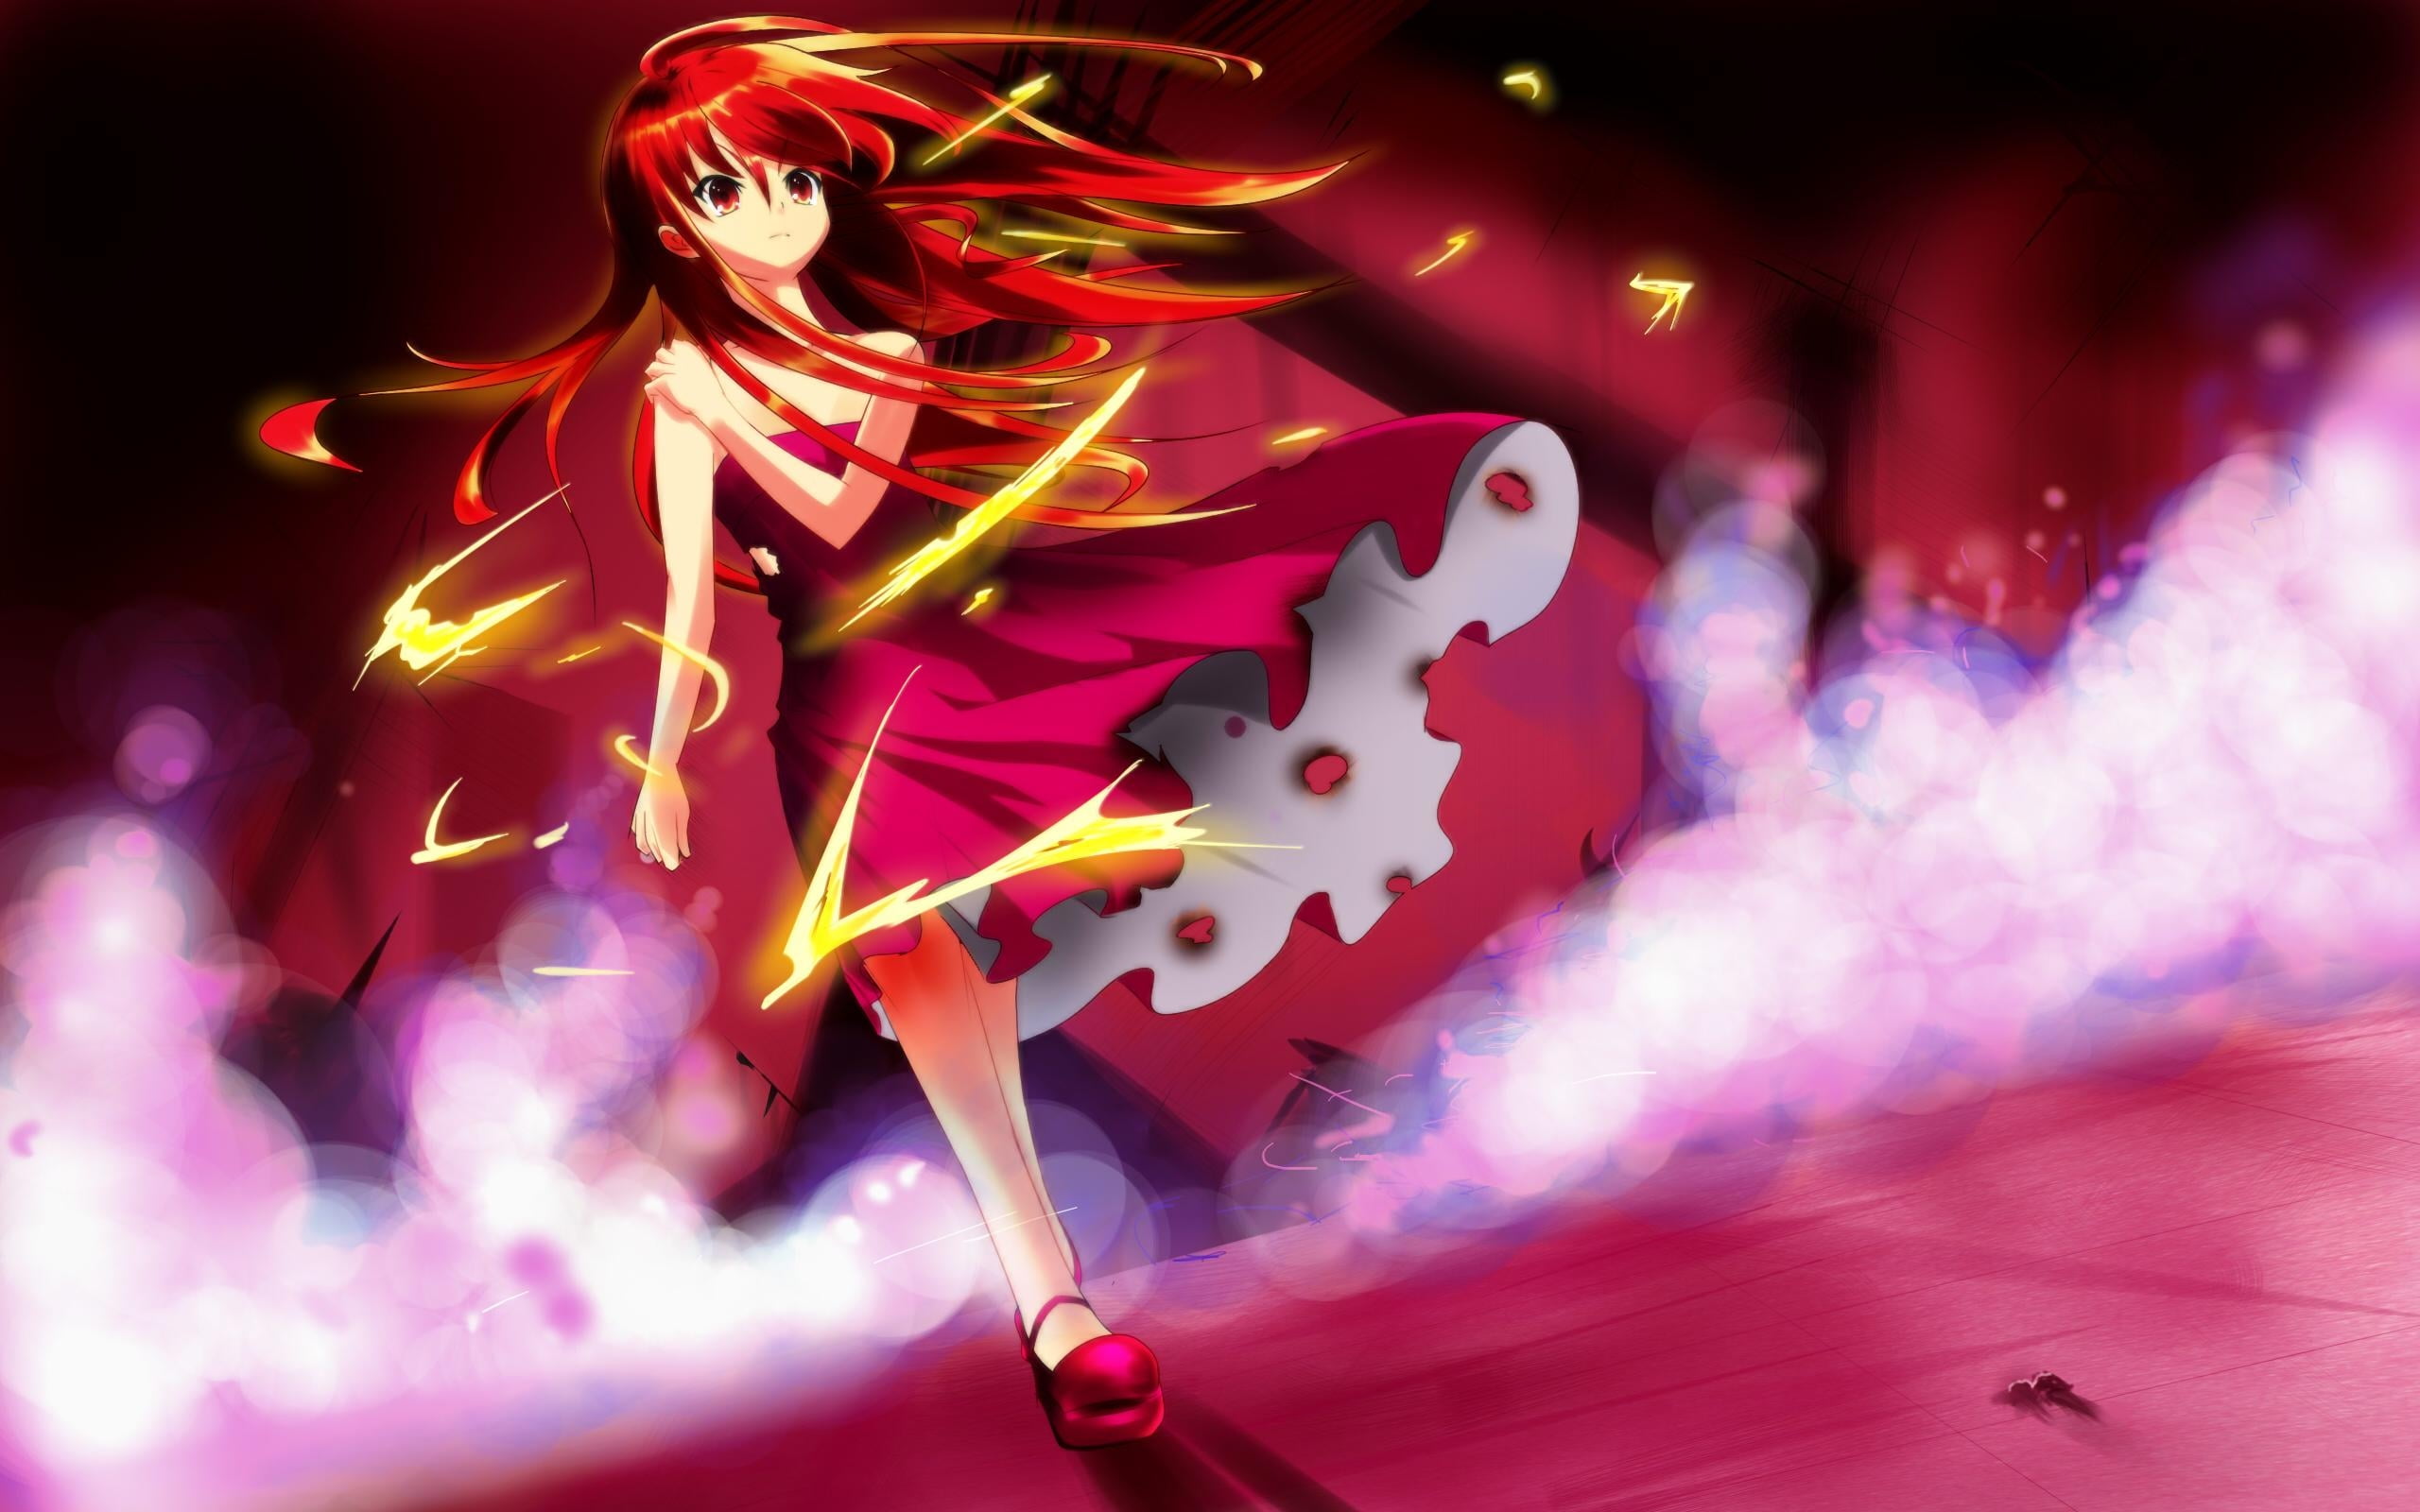 red haired female anime character in red dress